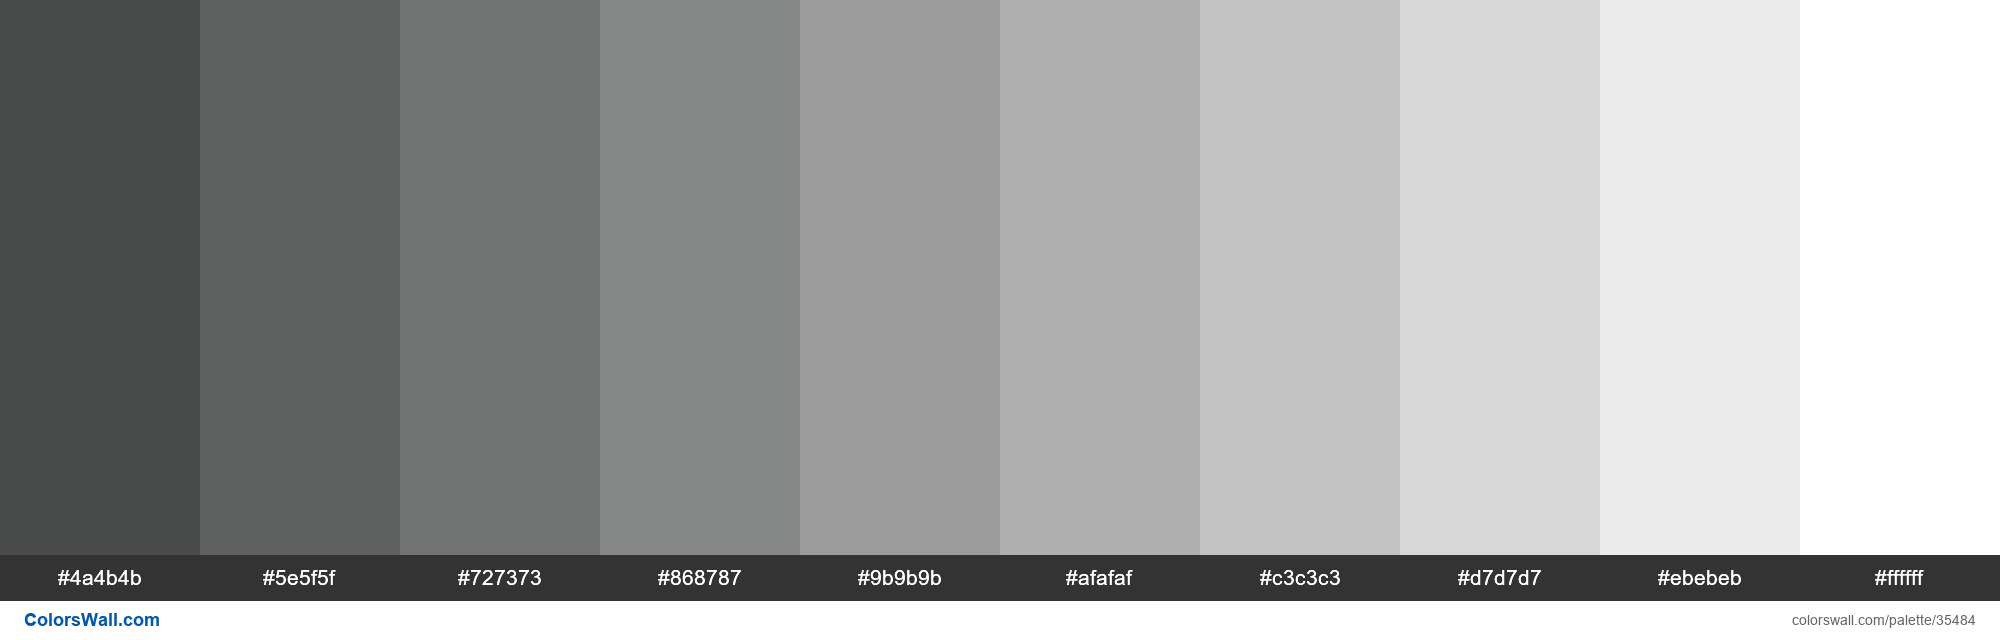 Shades XKCD Color dark grey #363737 hex colors palette - ColorsWall